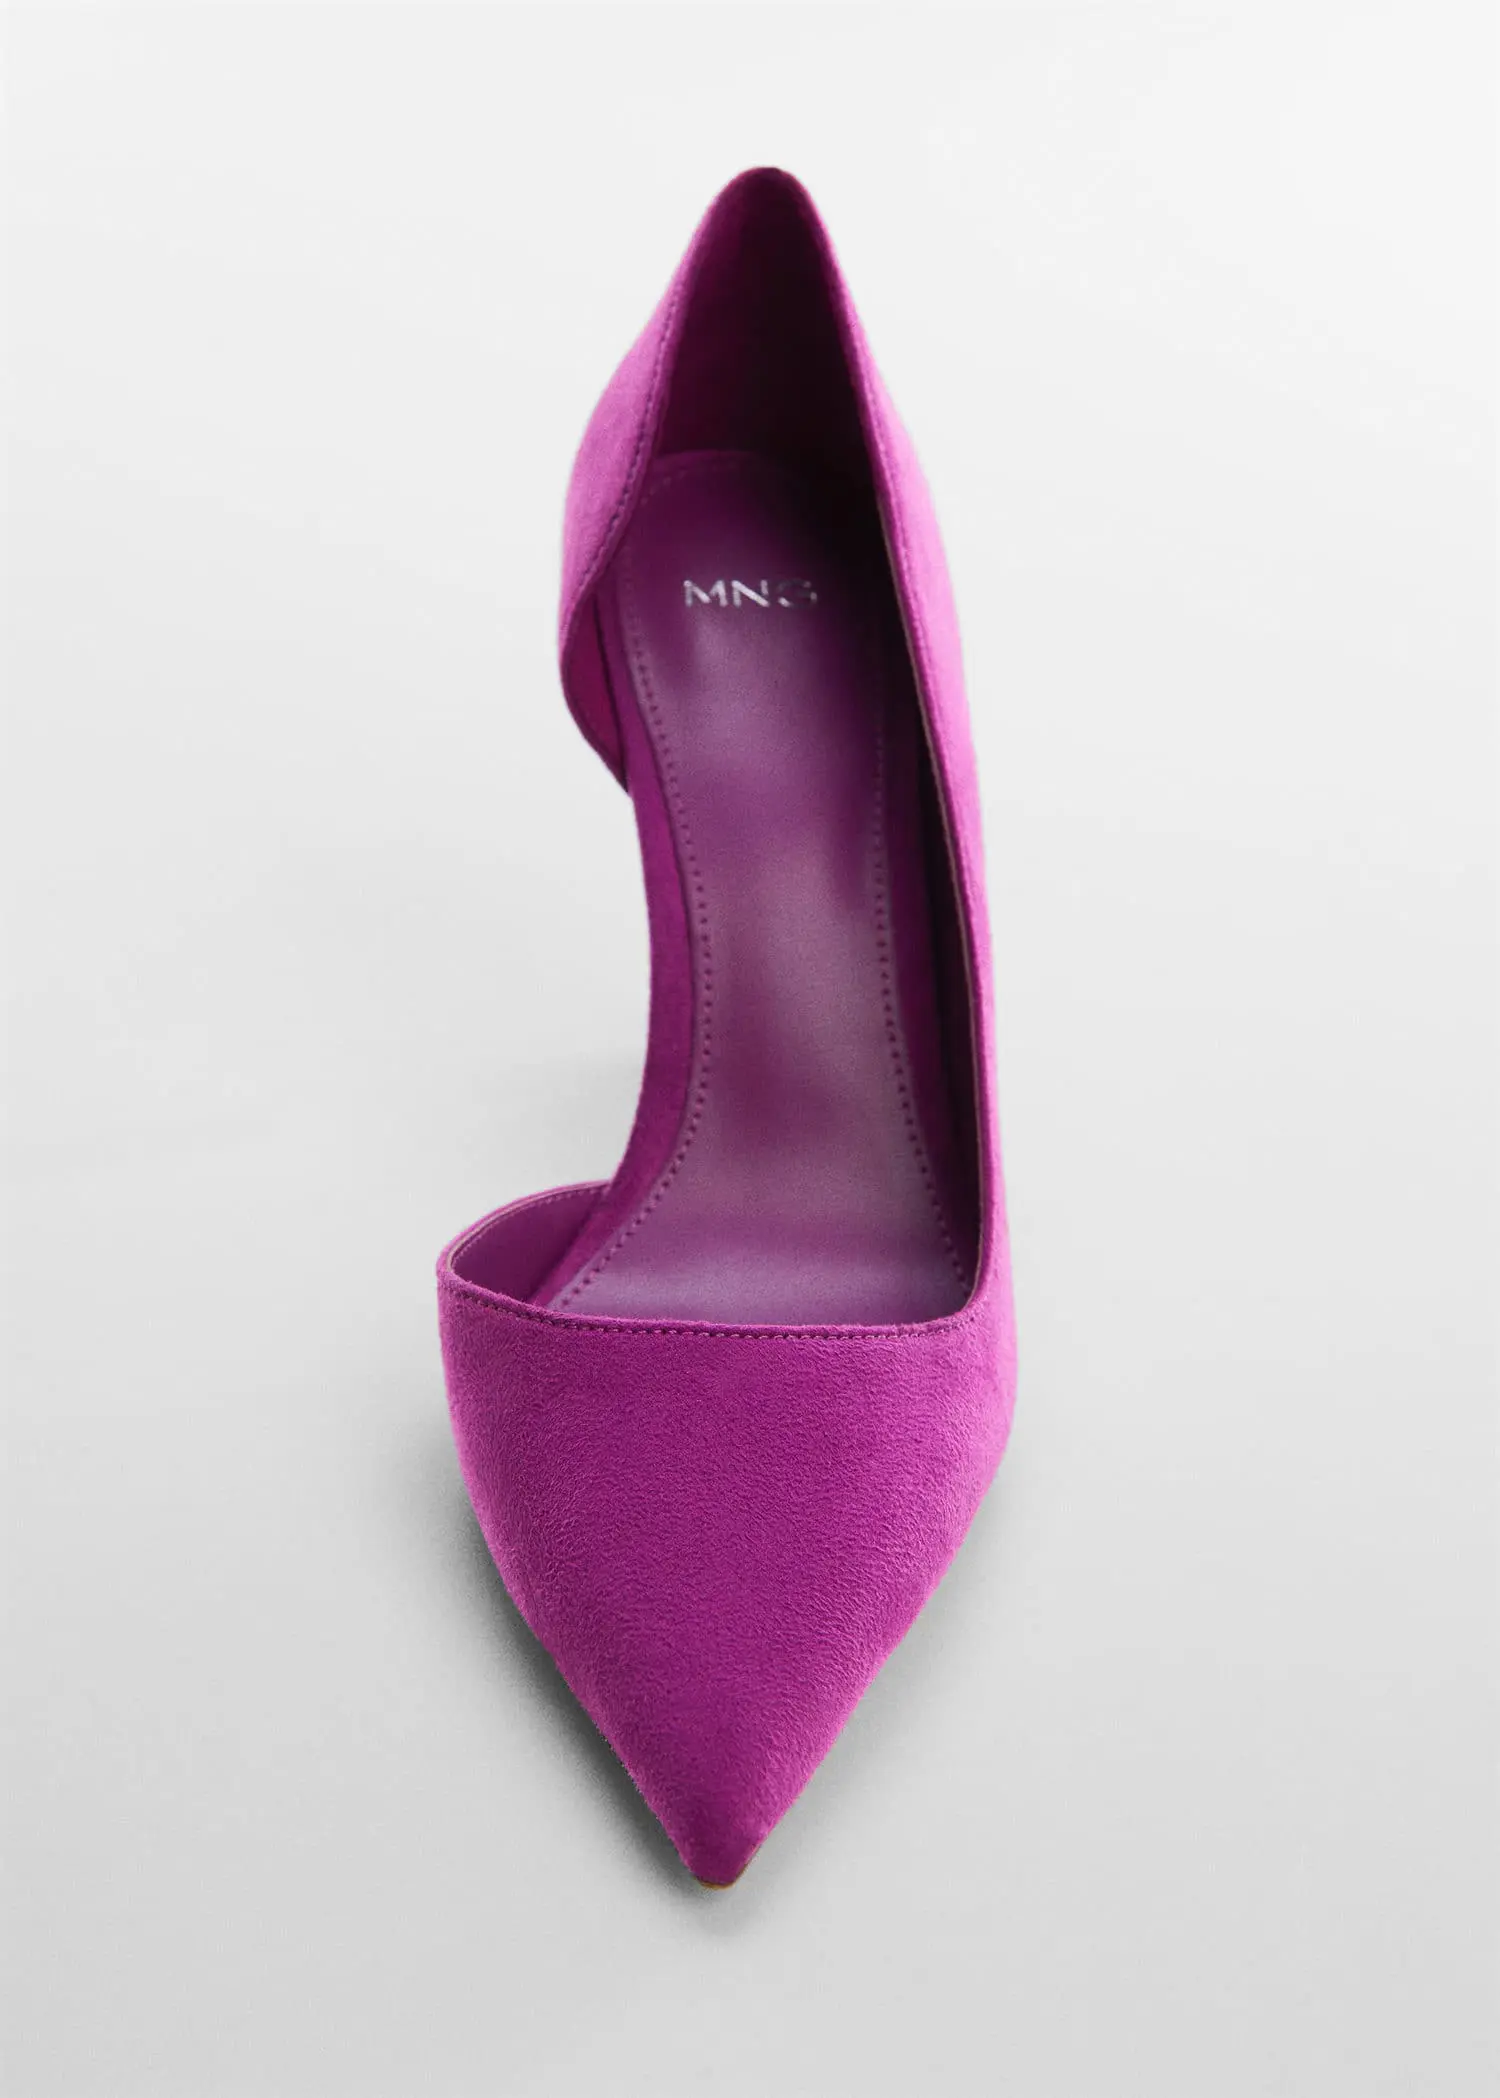 Mango Asymmetrical heeled shoes. a close up of a pair of pink shoes 